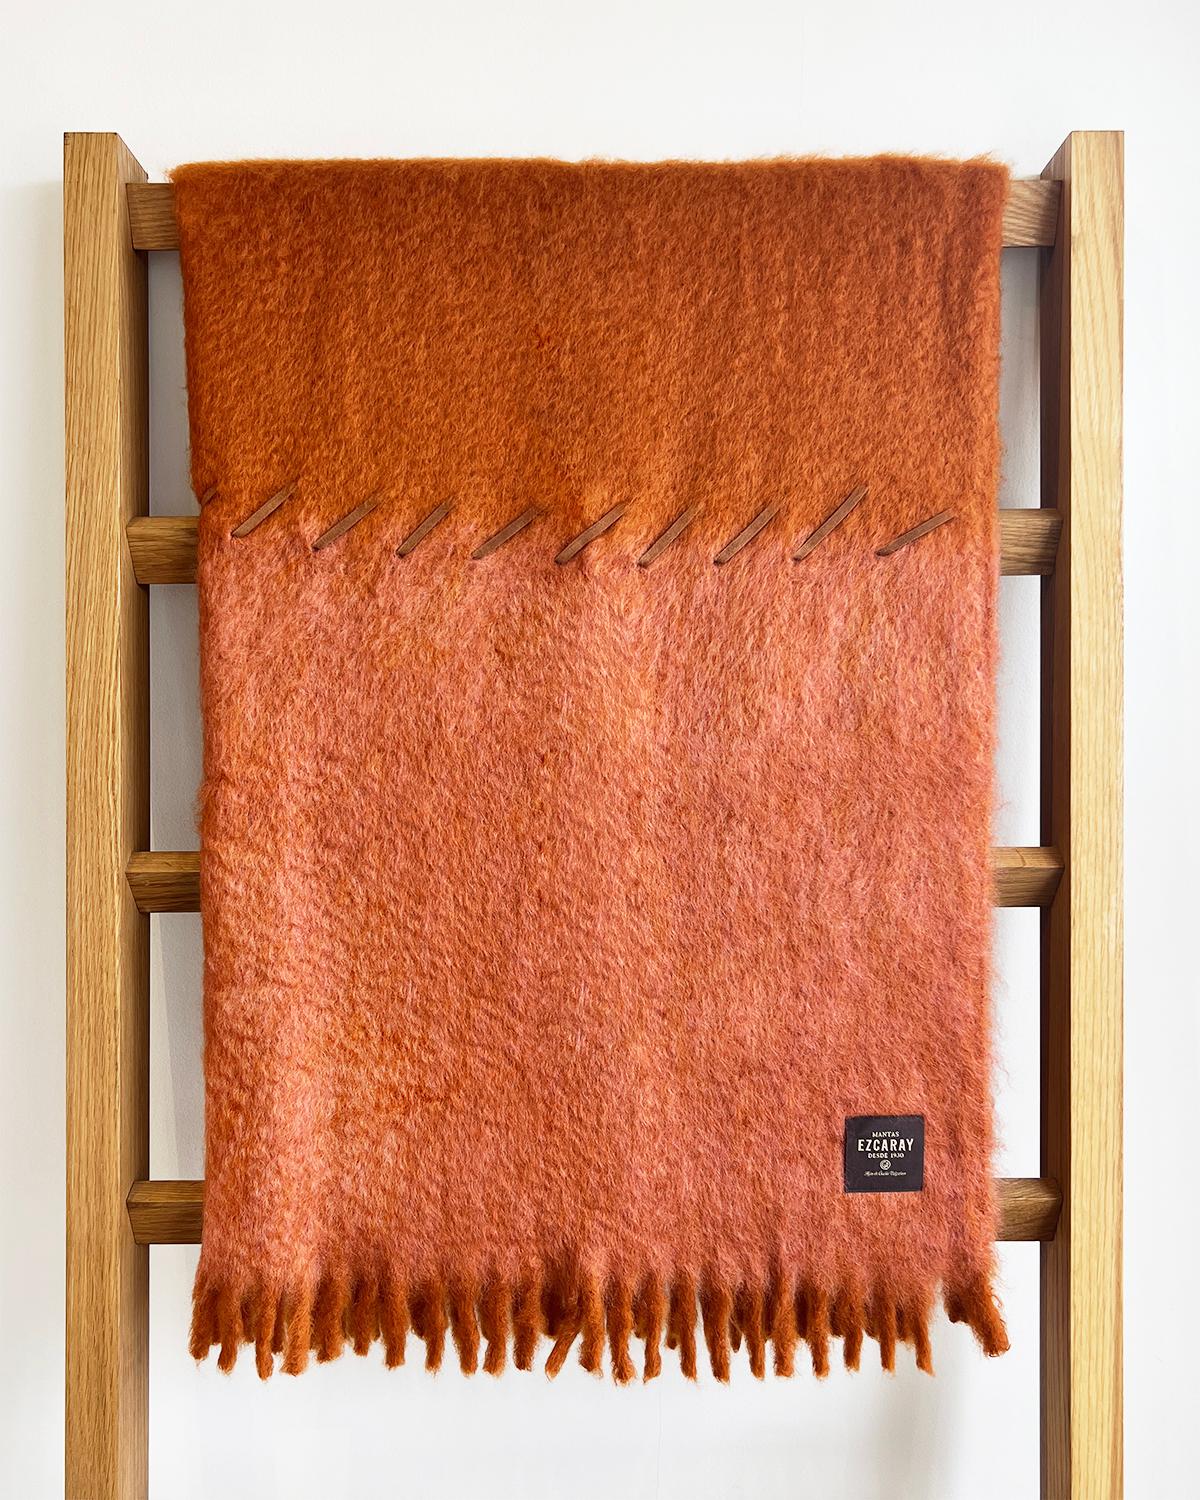 This cozy and warm Terracotta and Brick Mohair Blanket is perfect for home décor. The soft and fuzzy mohair features a color block with red and orange hues, designed to add a chic touch to any bedroom or living room. The whipstitch suede finish